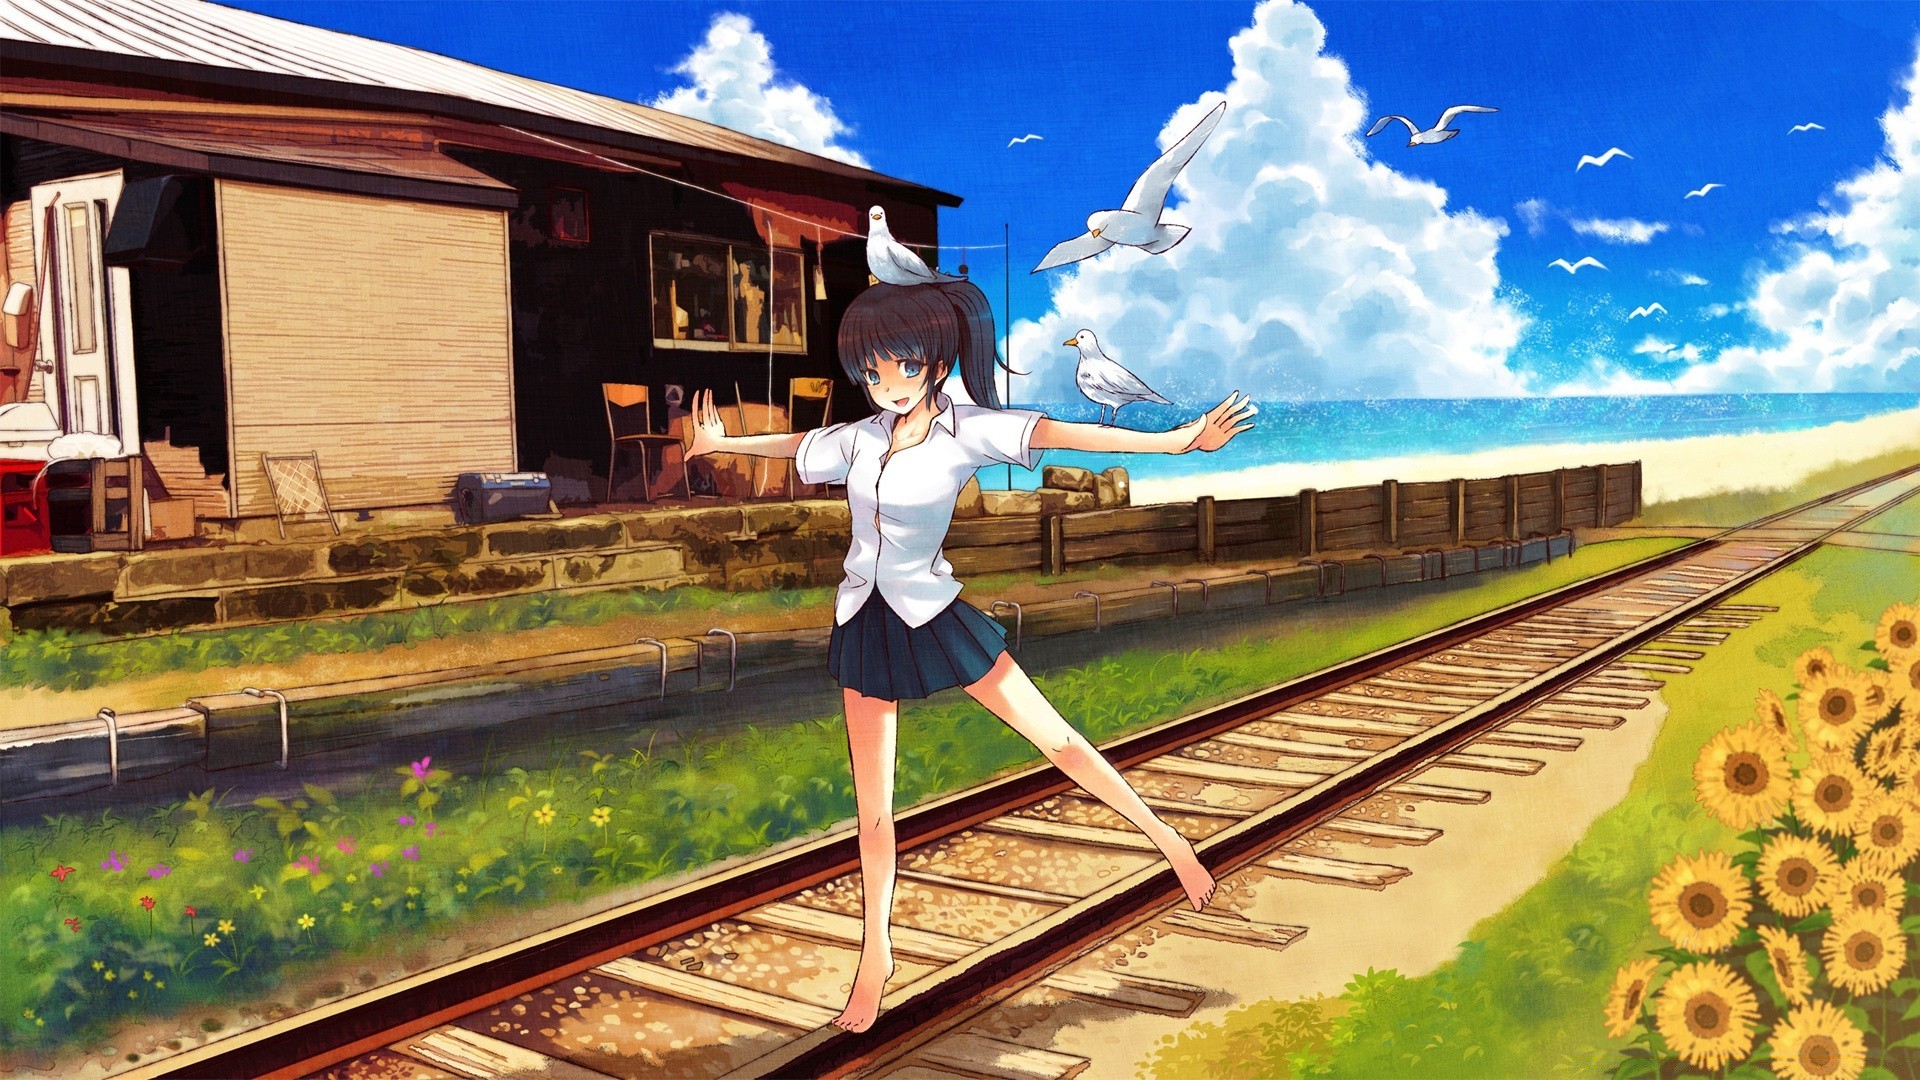 Anime Scenery Free Wallpapers